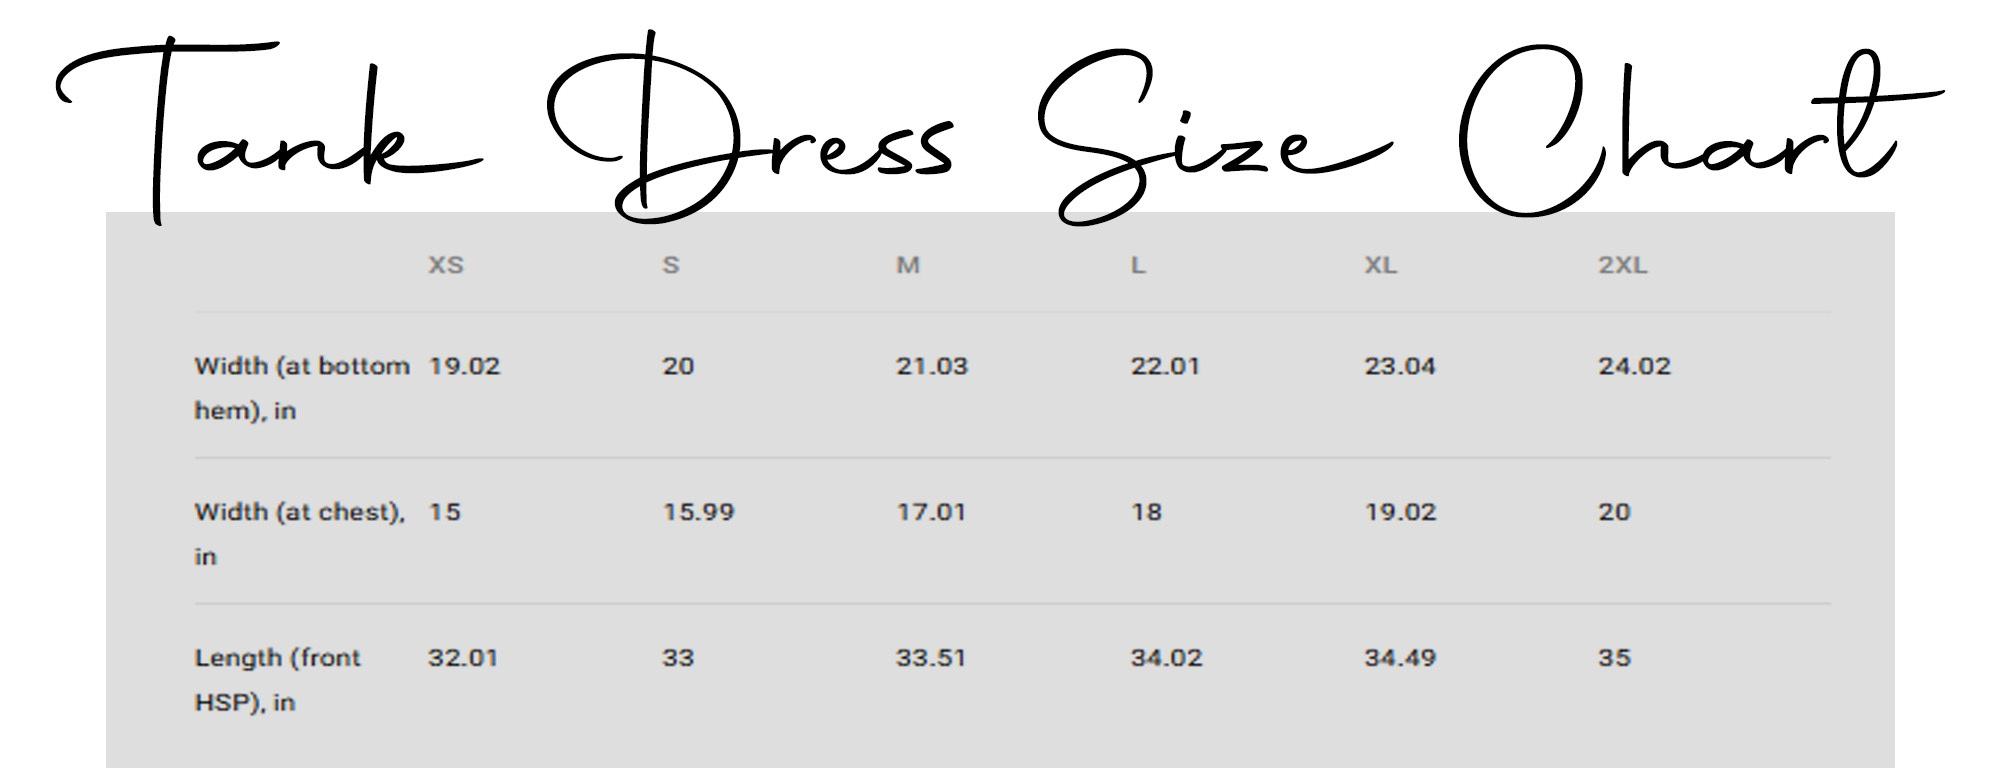 Simply Thick Tank Mini Dress For Teens and Women